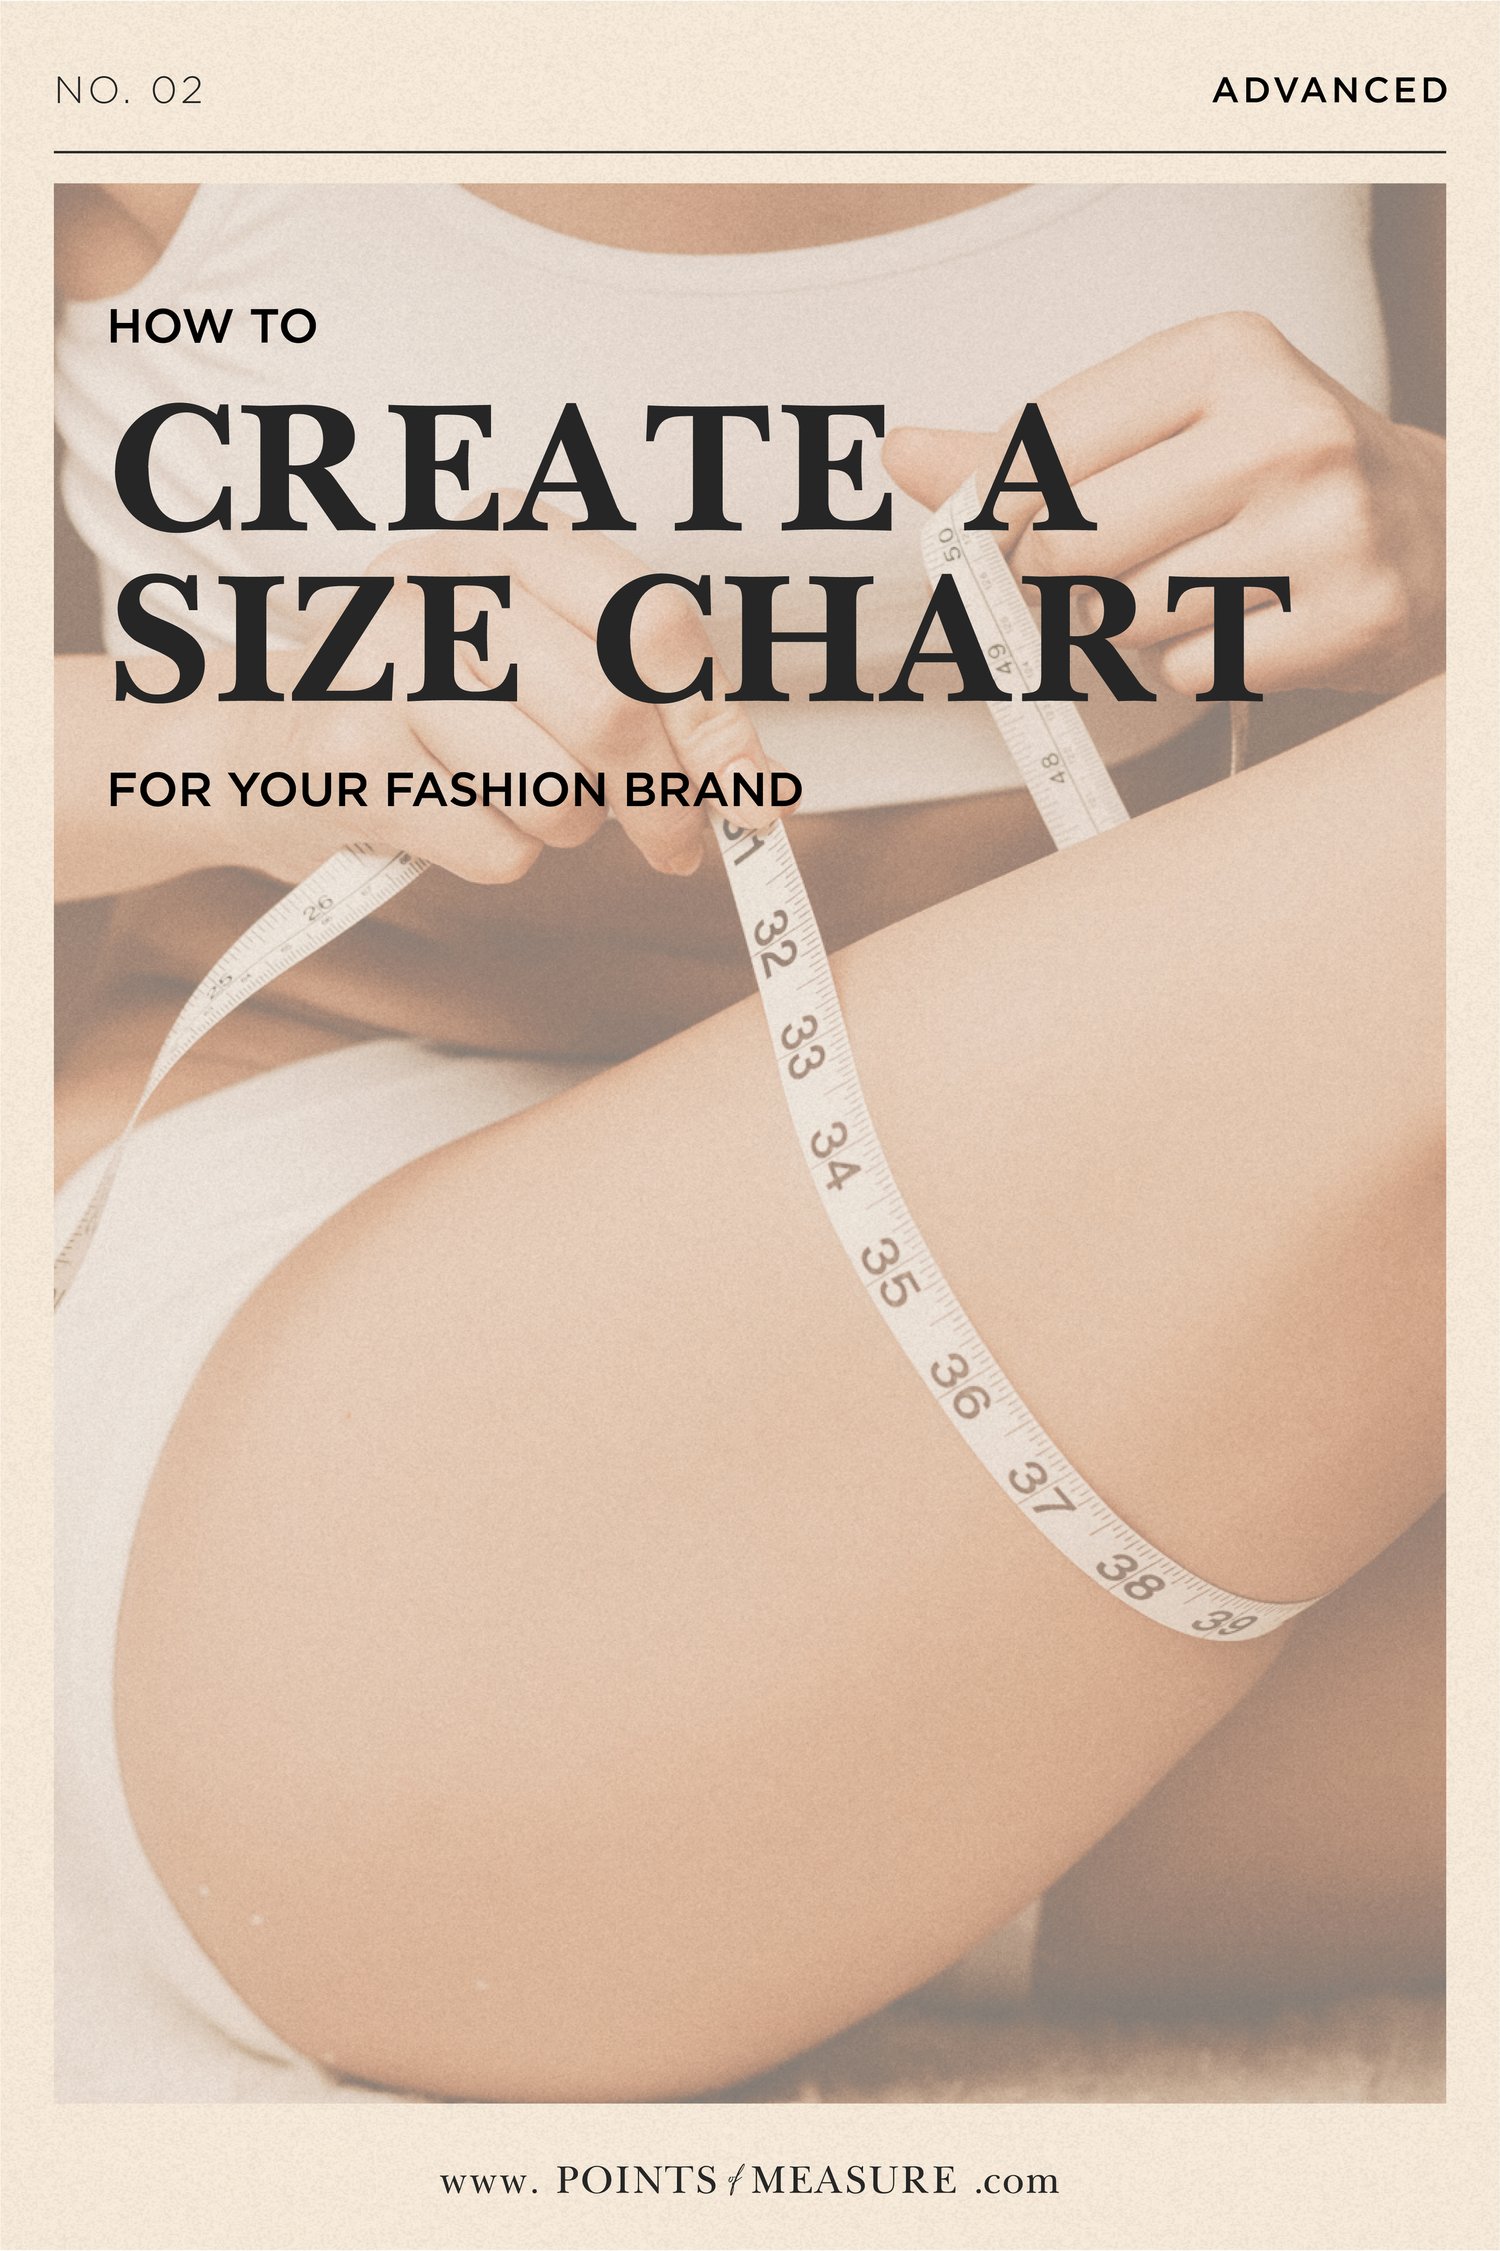 How to Use Clothing Size Charts - SizeCharter